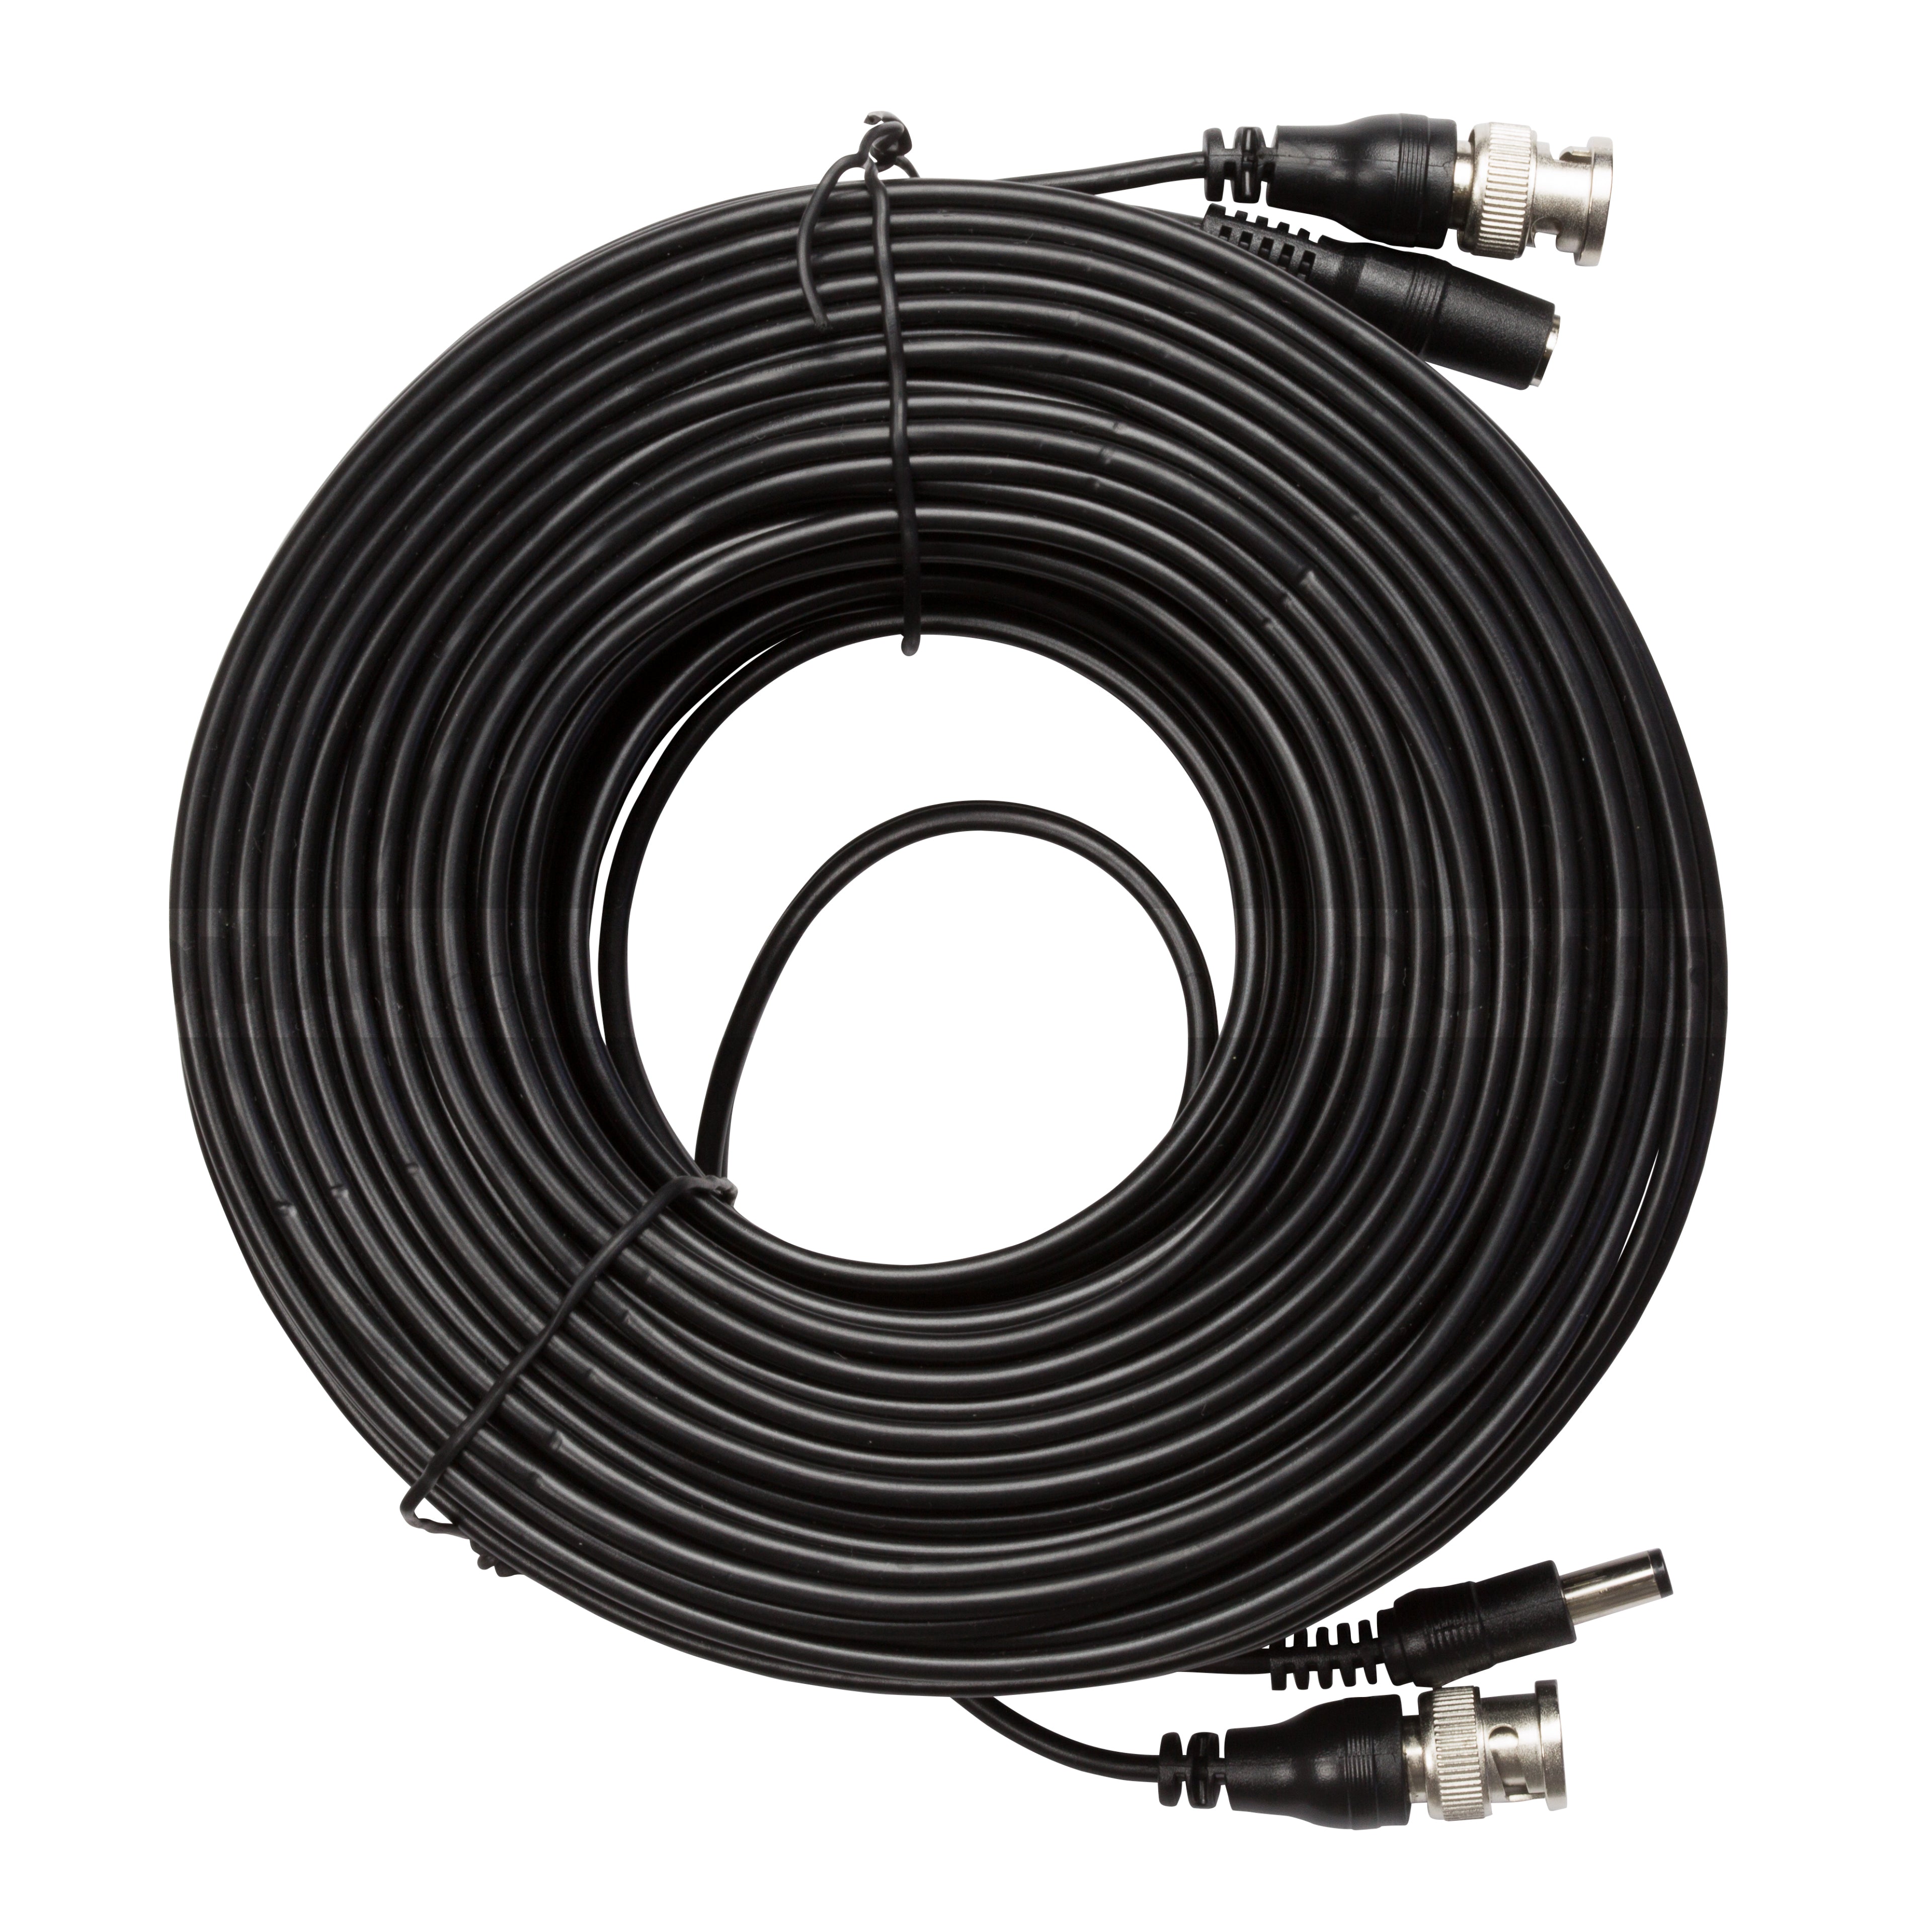 Zxtech 40M Black Pre-Made RG59 Siamese Cable